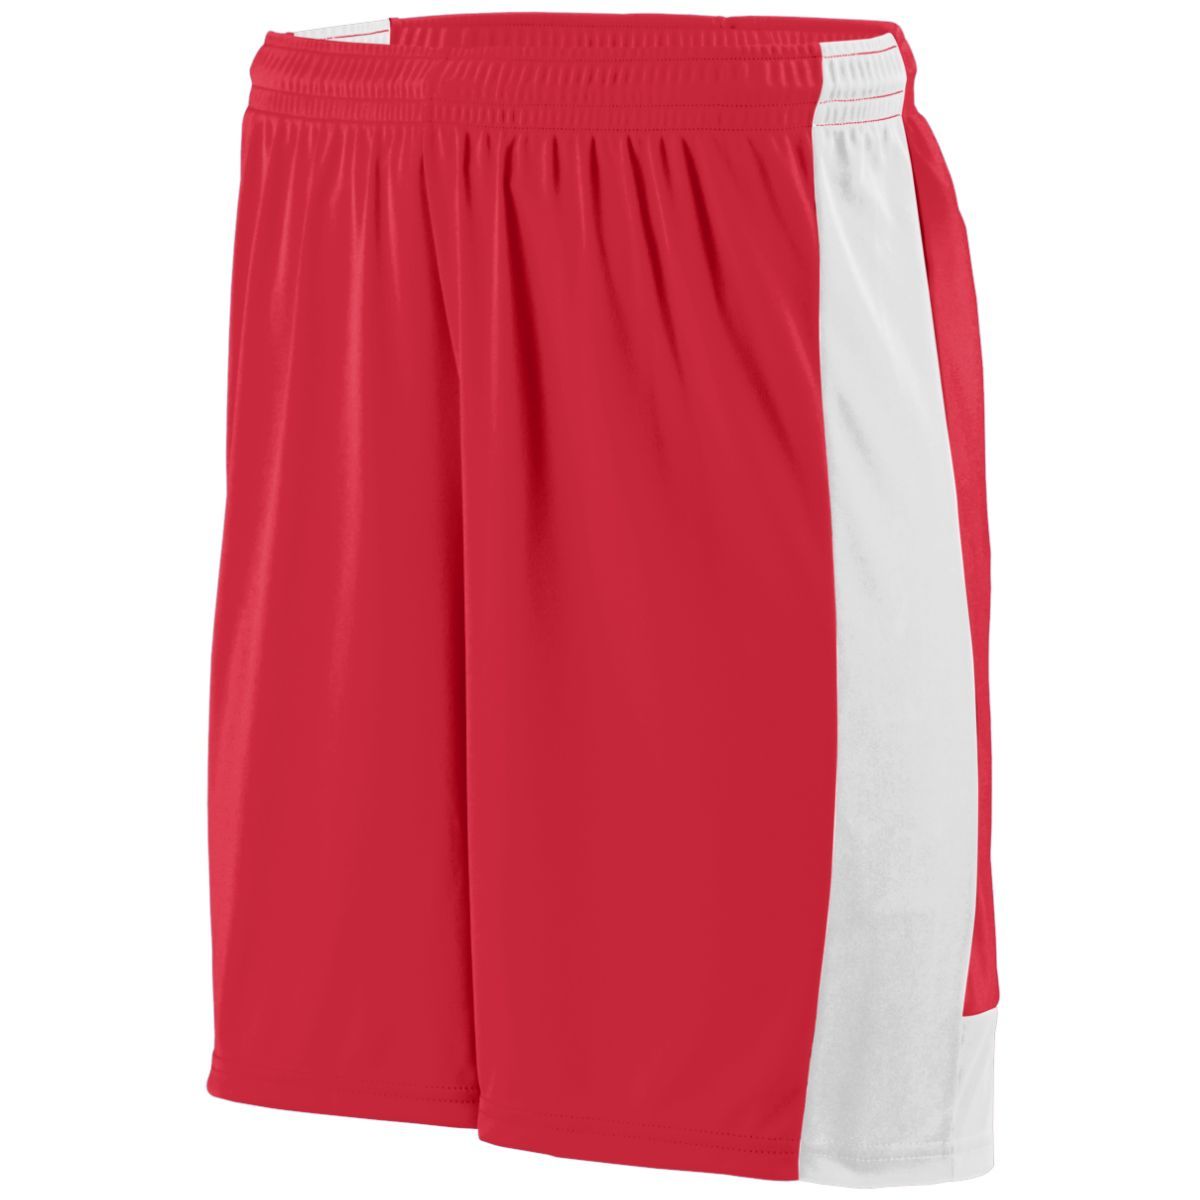 Augusta Sportswear Youth Lightning Shorts in Red/White  -Part of the Youth, Youth-Shorts, Augusta-Products, Soccer, All-Sports-1 product lines at KanaleyCreations.com